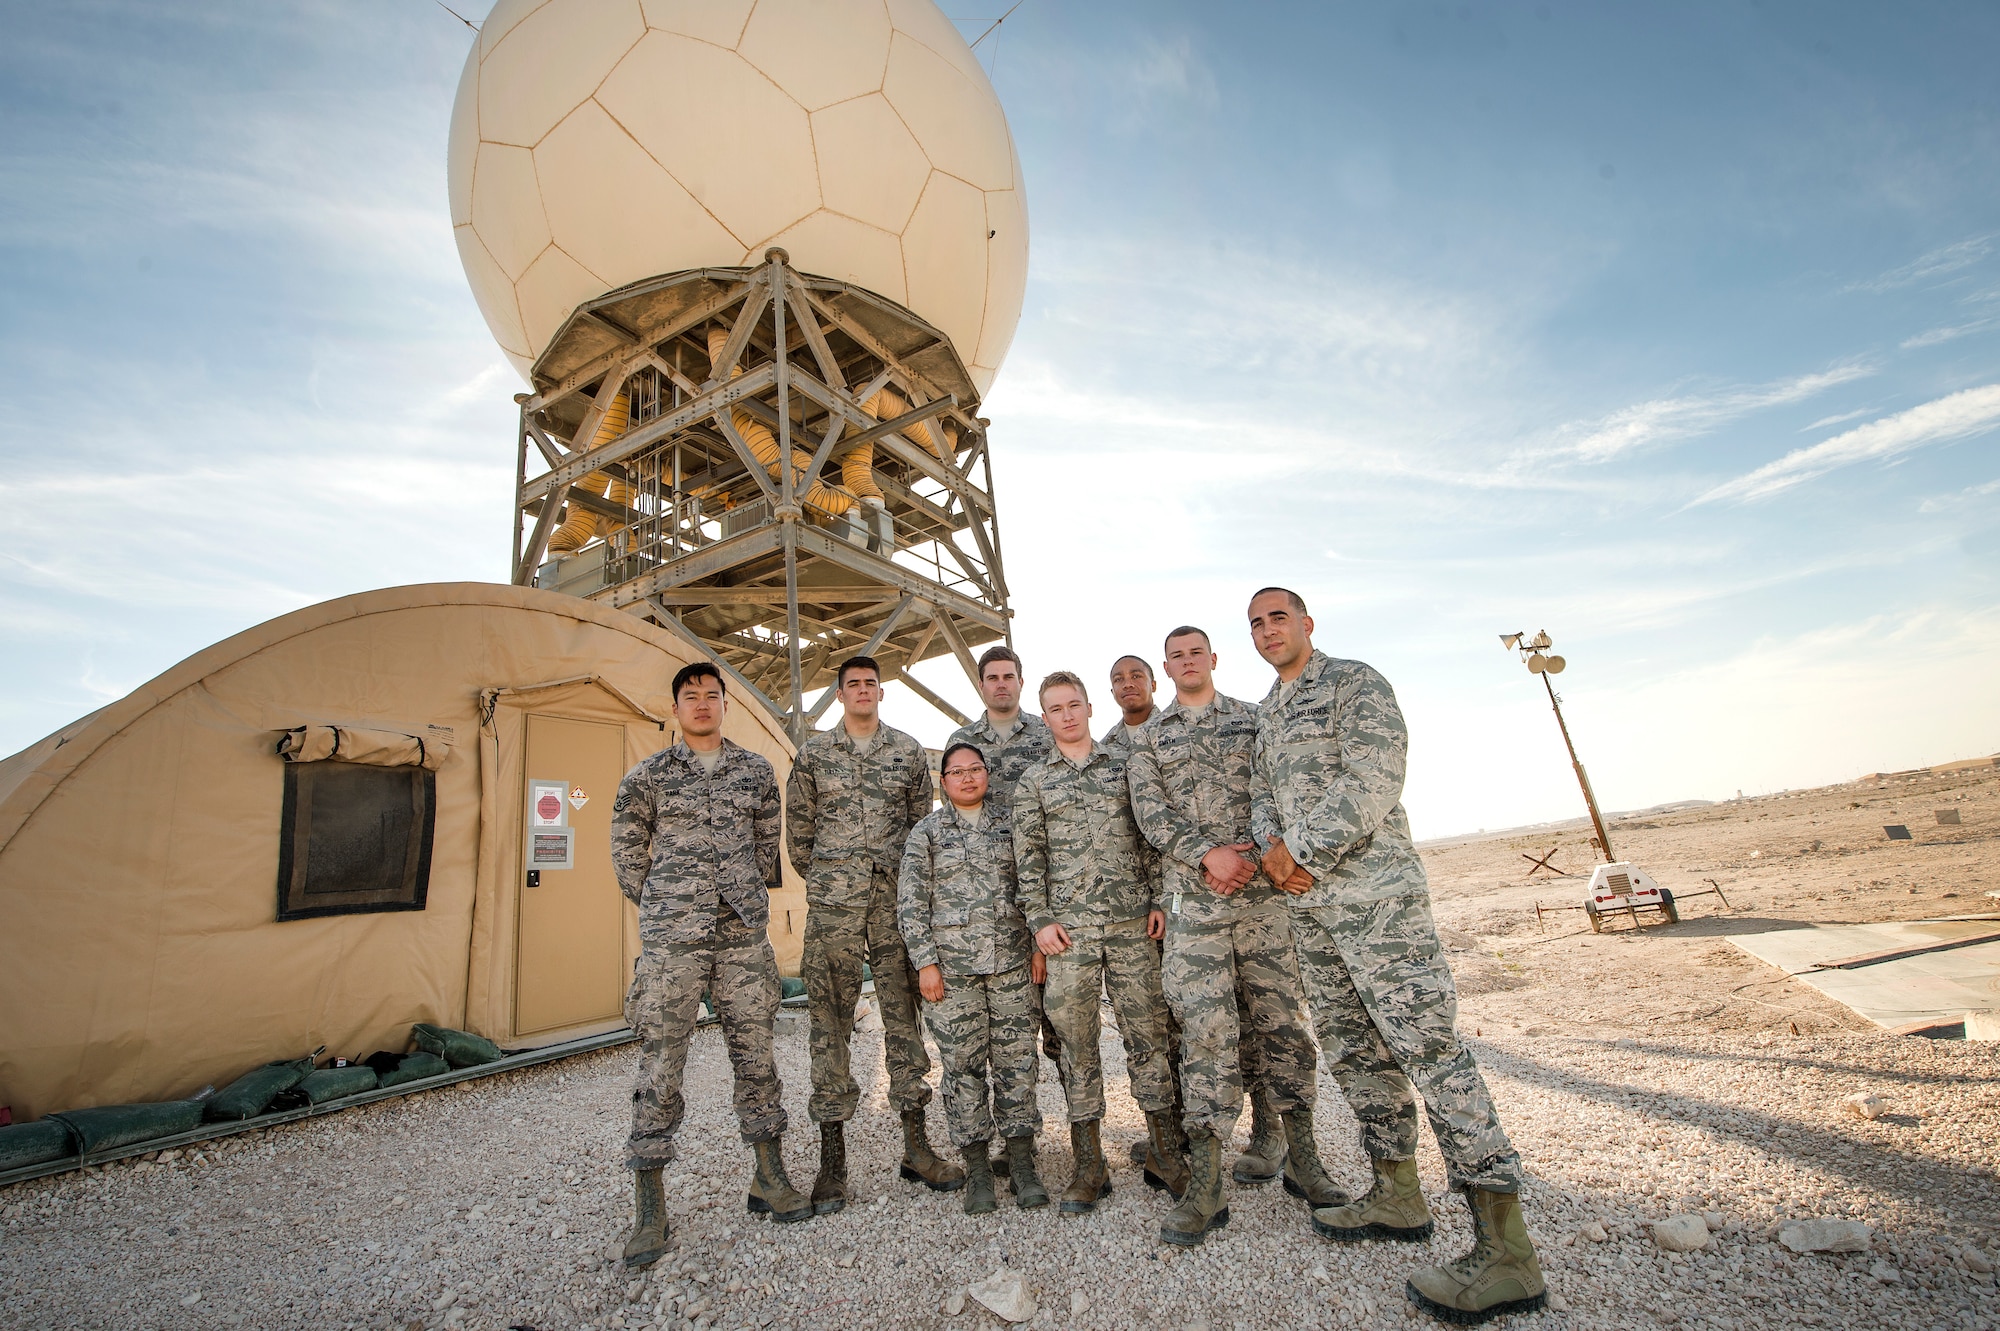 Airmen assigned to Detachment 3 of the 727th Expeditionary Air Control Squadron (EACS), stand in front of a transportable radar system (TPS-75) Jan. 14, 2019, at Al Udeid Air Base, Qatar. The 727th EACS consists of a team of 23 Airmen from seven different Air Force Specialty Codes. Together, they ensure TPS-75 radar systems are prepared to identify any aircraft within a 240 nautical mile range of Al Udeid. (U.S. Air Force Tech. Sgt. Christopher Hubenthal)